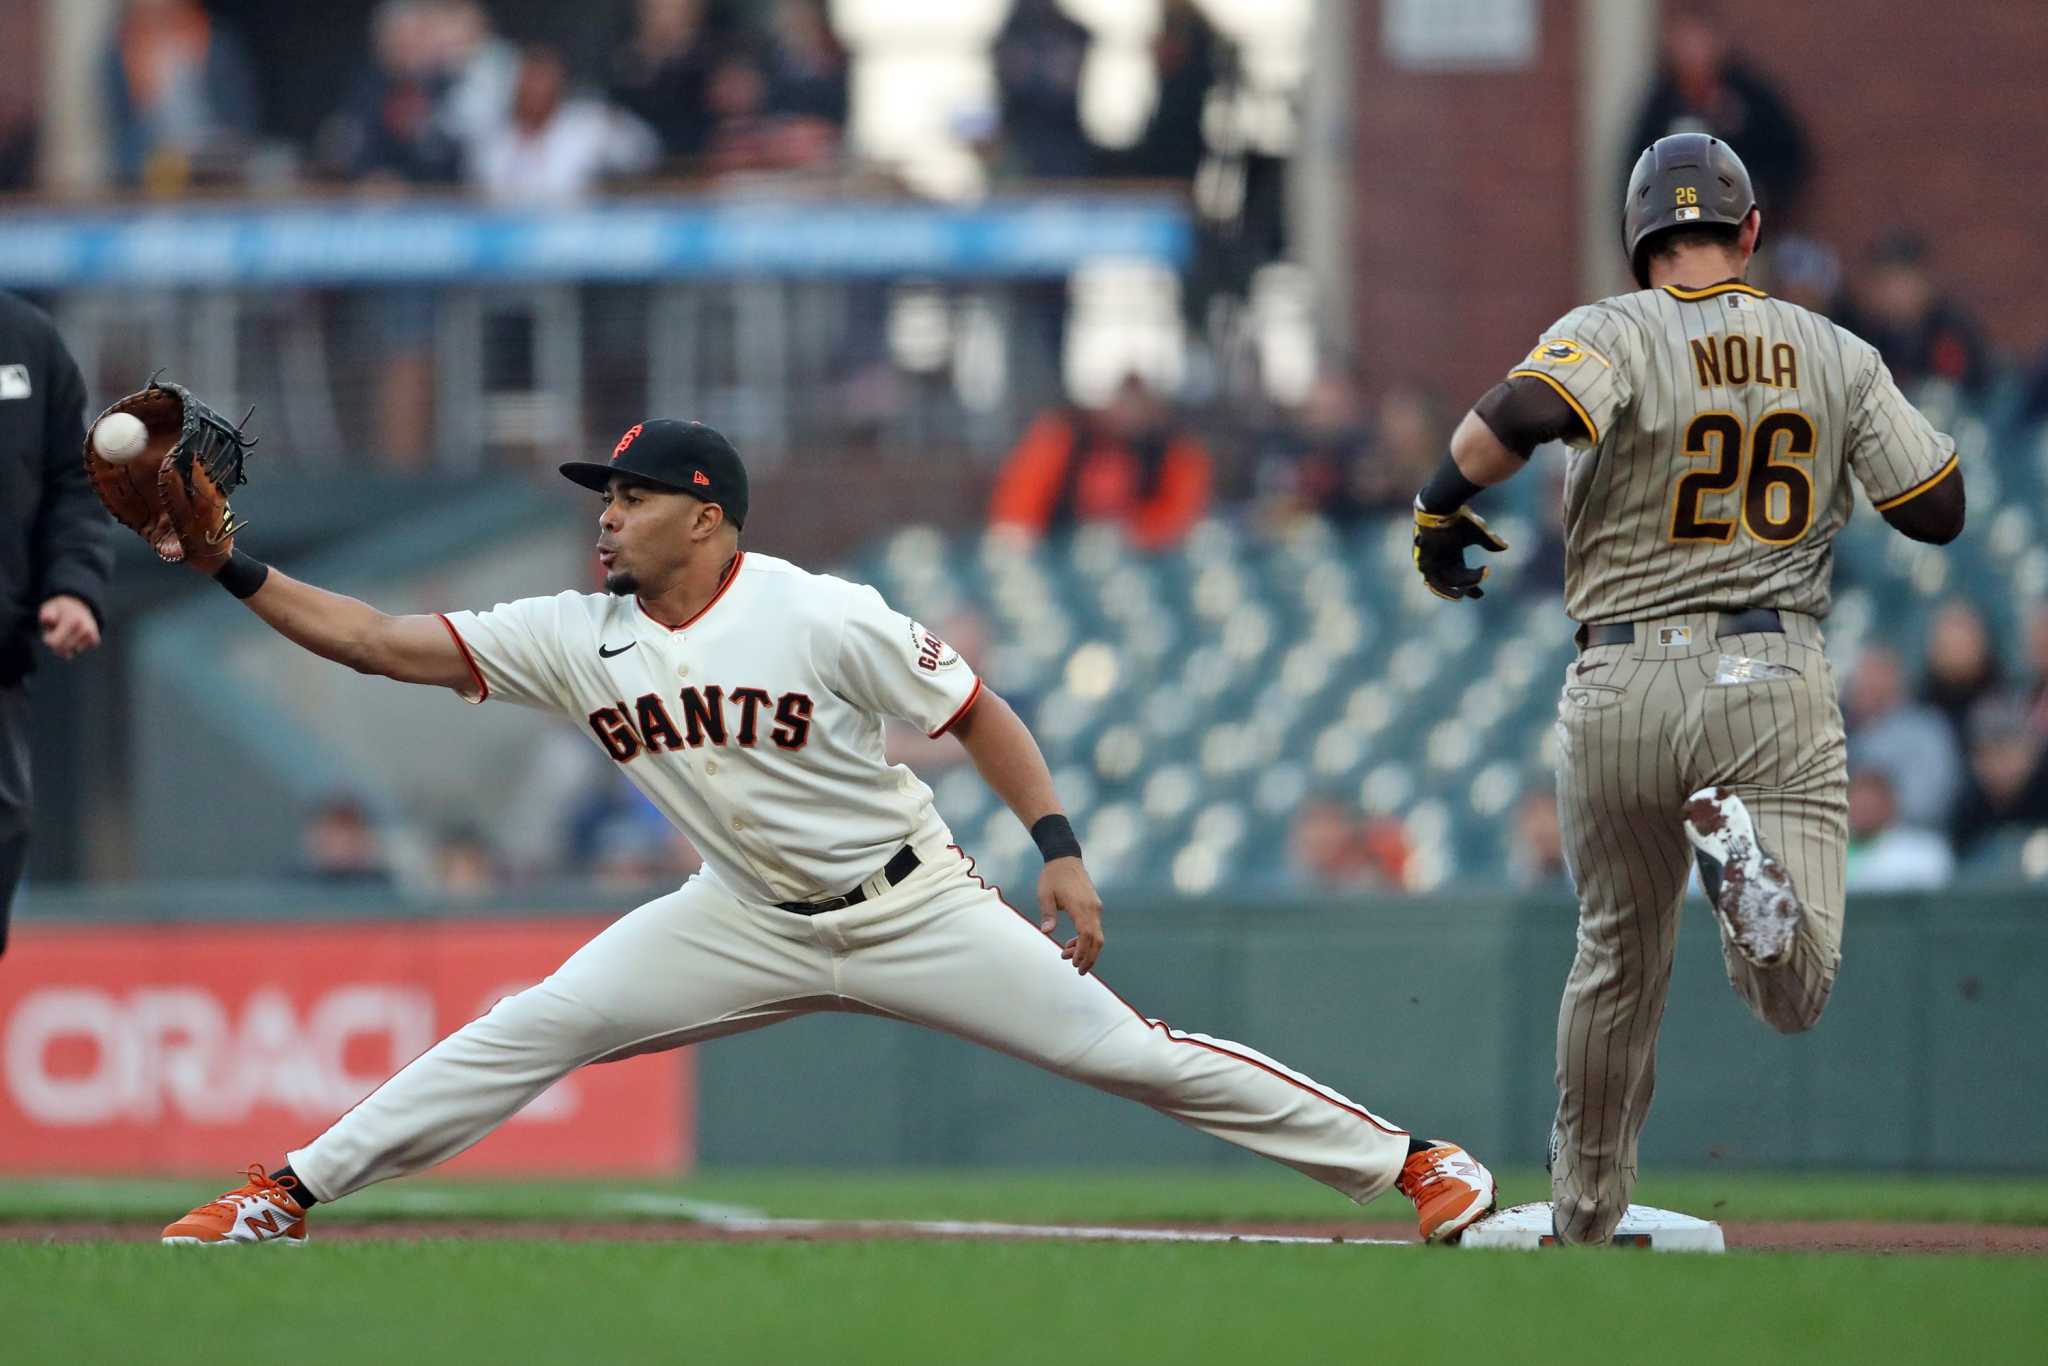 Ex-Giant Brandon Belt says LaMonte Wade Jr. can be 'a force